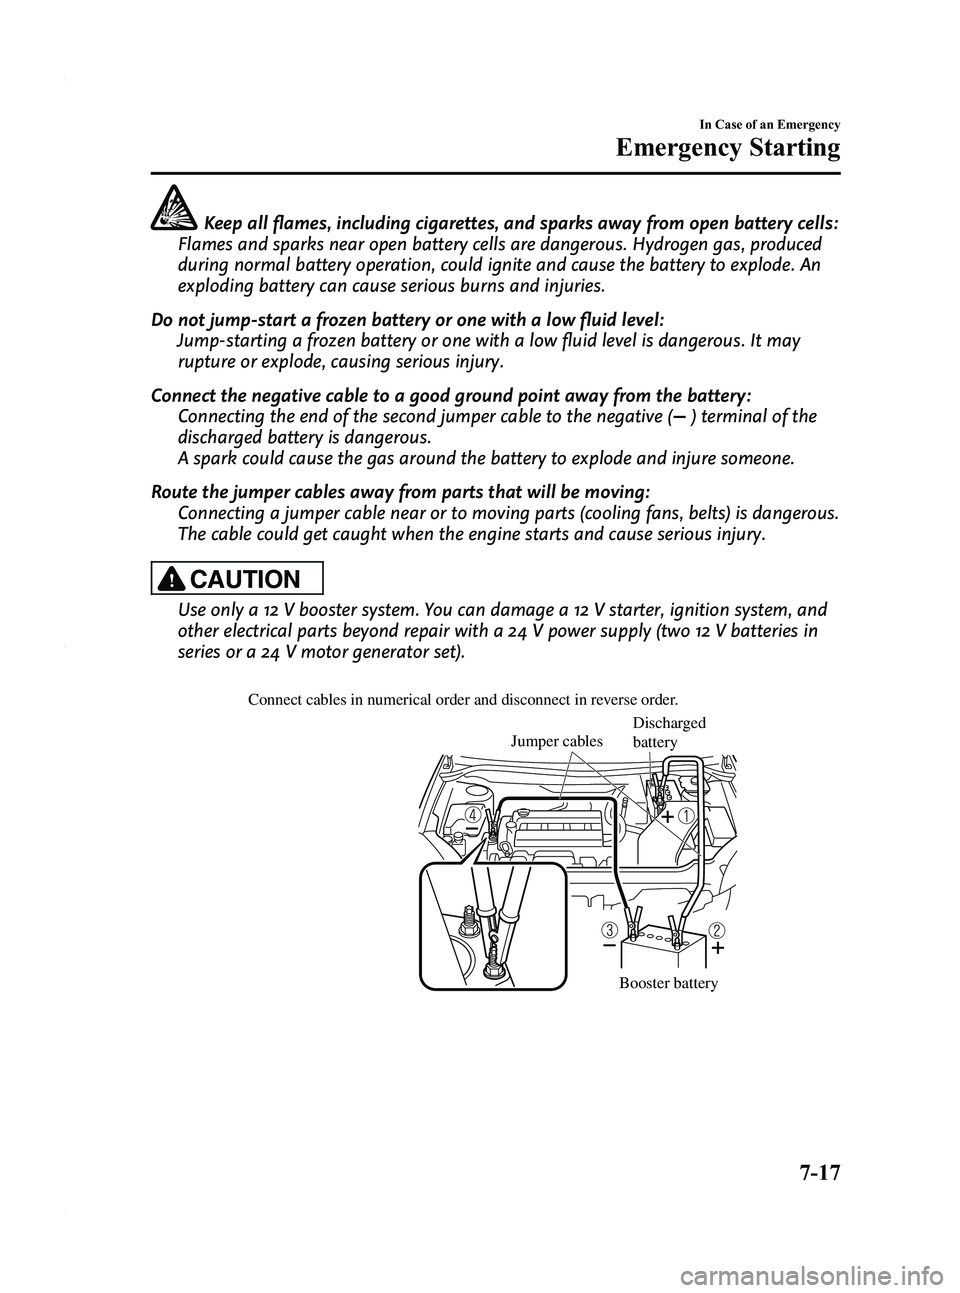 MAZDA MODEL 5 2010  Owners Manual Black plate (263,1)
Keep all flames, including cigarettes, and sparks away from open battery cells:
Flames and sparks near open battery cells are dangerous. Hydrogen gas, produced
during normal batter